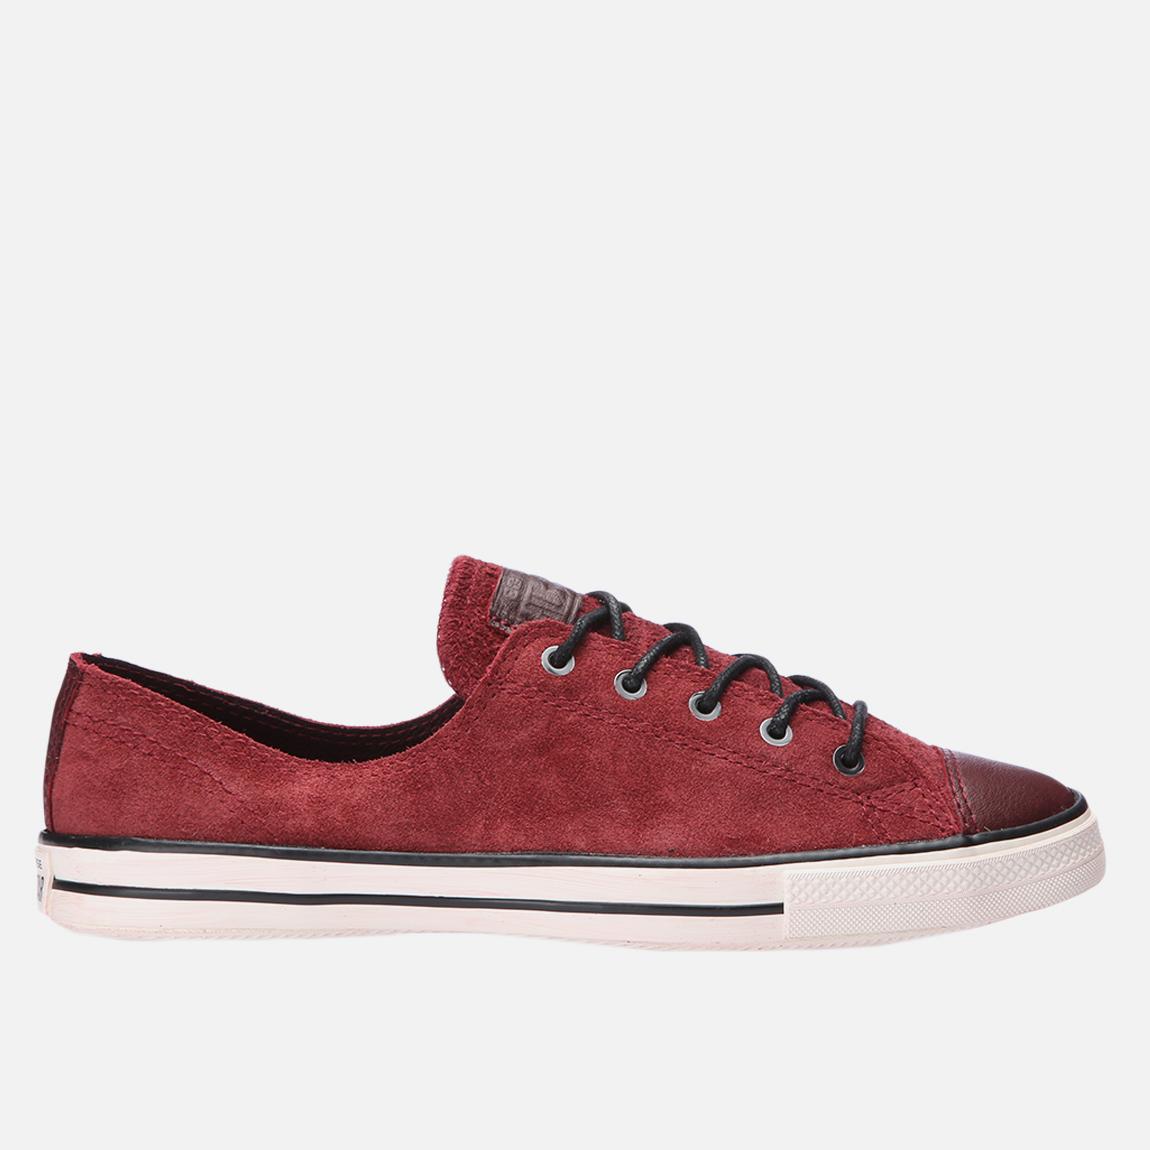 Chuck Taylor All Star Fancy Suede- Maroon Converse Sneakers ...